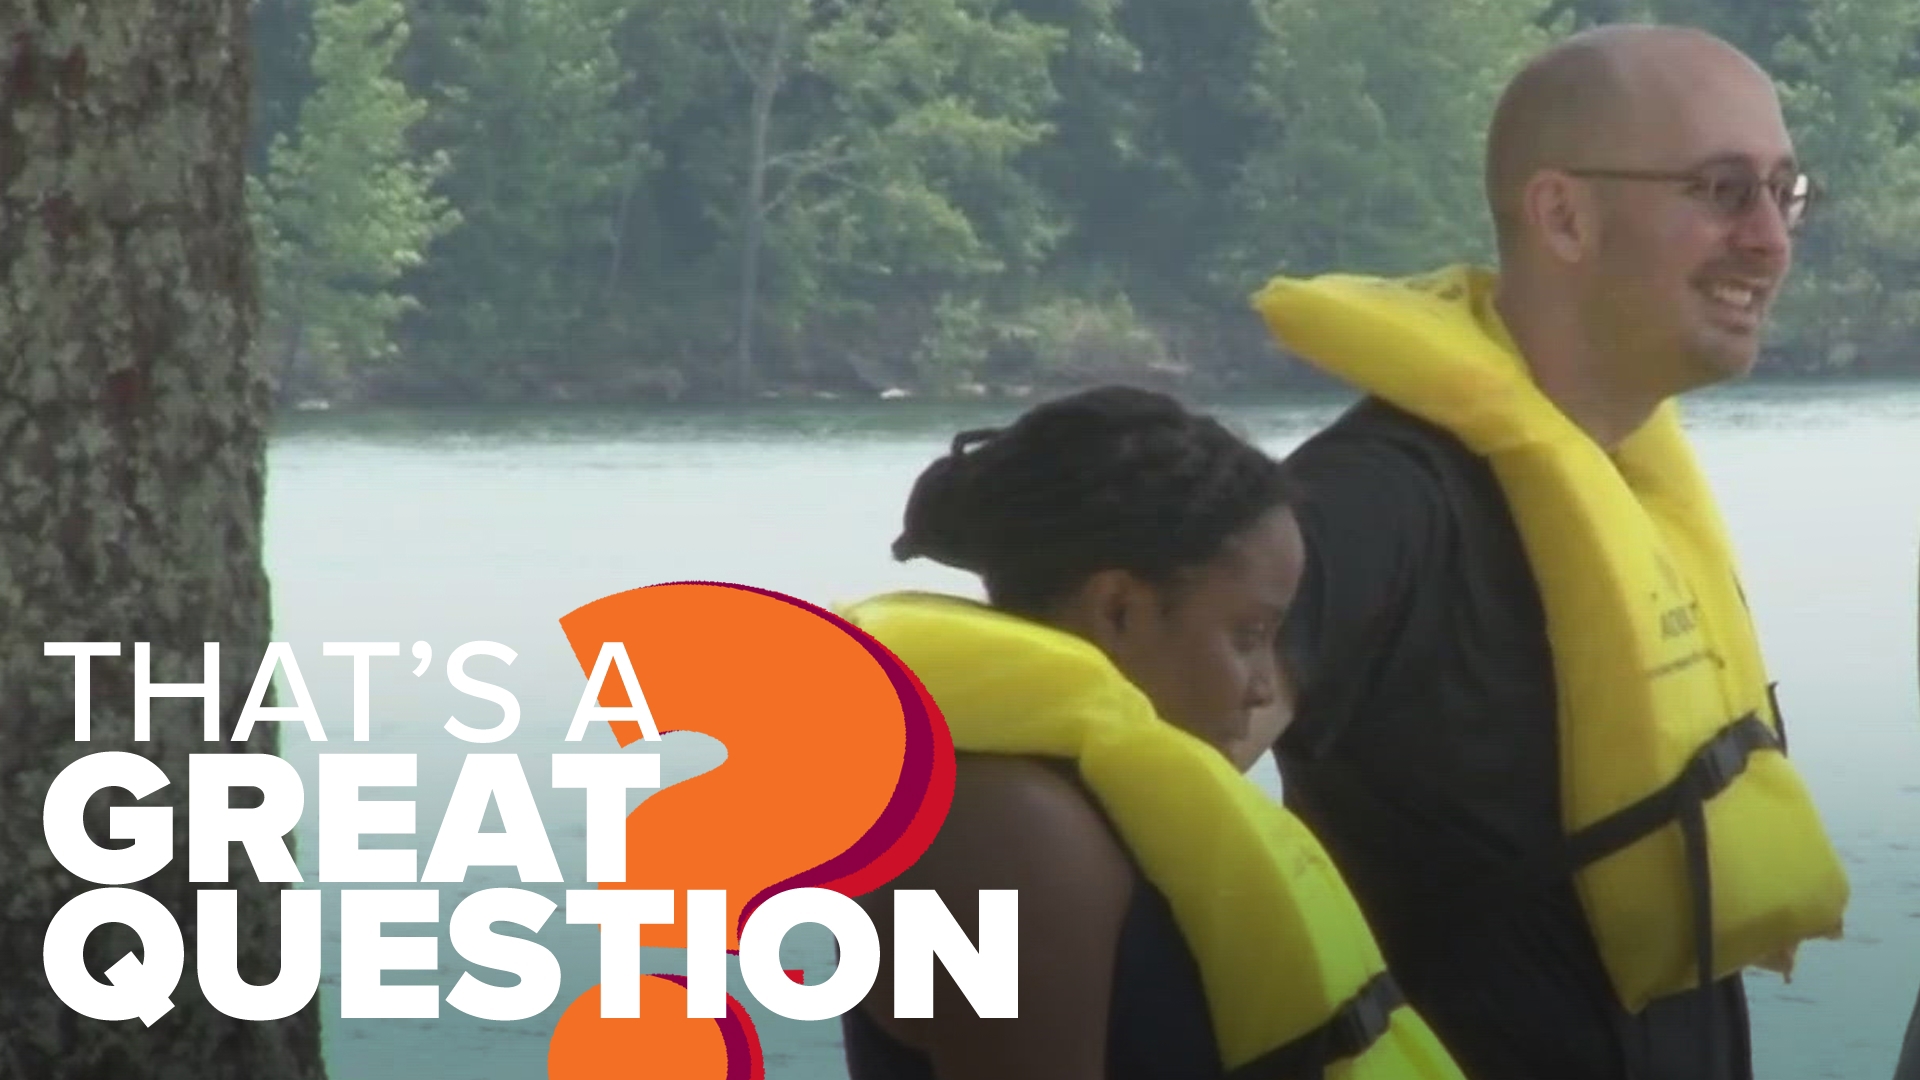 Although it is preached year after year, people continue not to wear their life jackets. But can you be arrested if you're caught by authorities not wearing one?